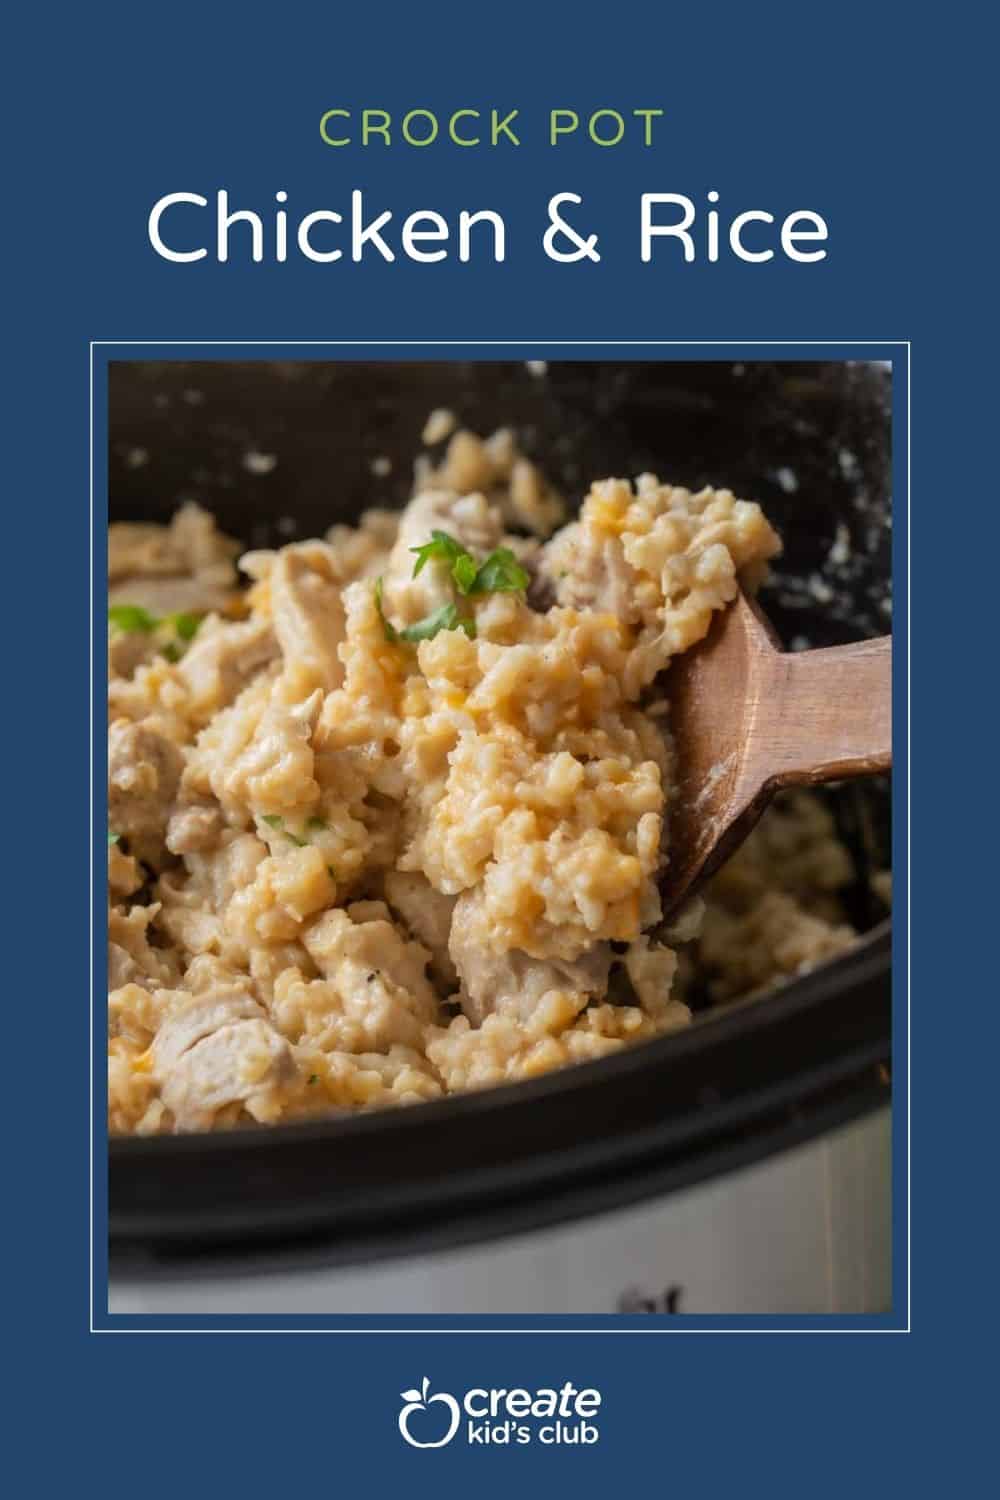 Pin of chicken and rice made in the crockpot.